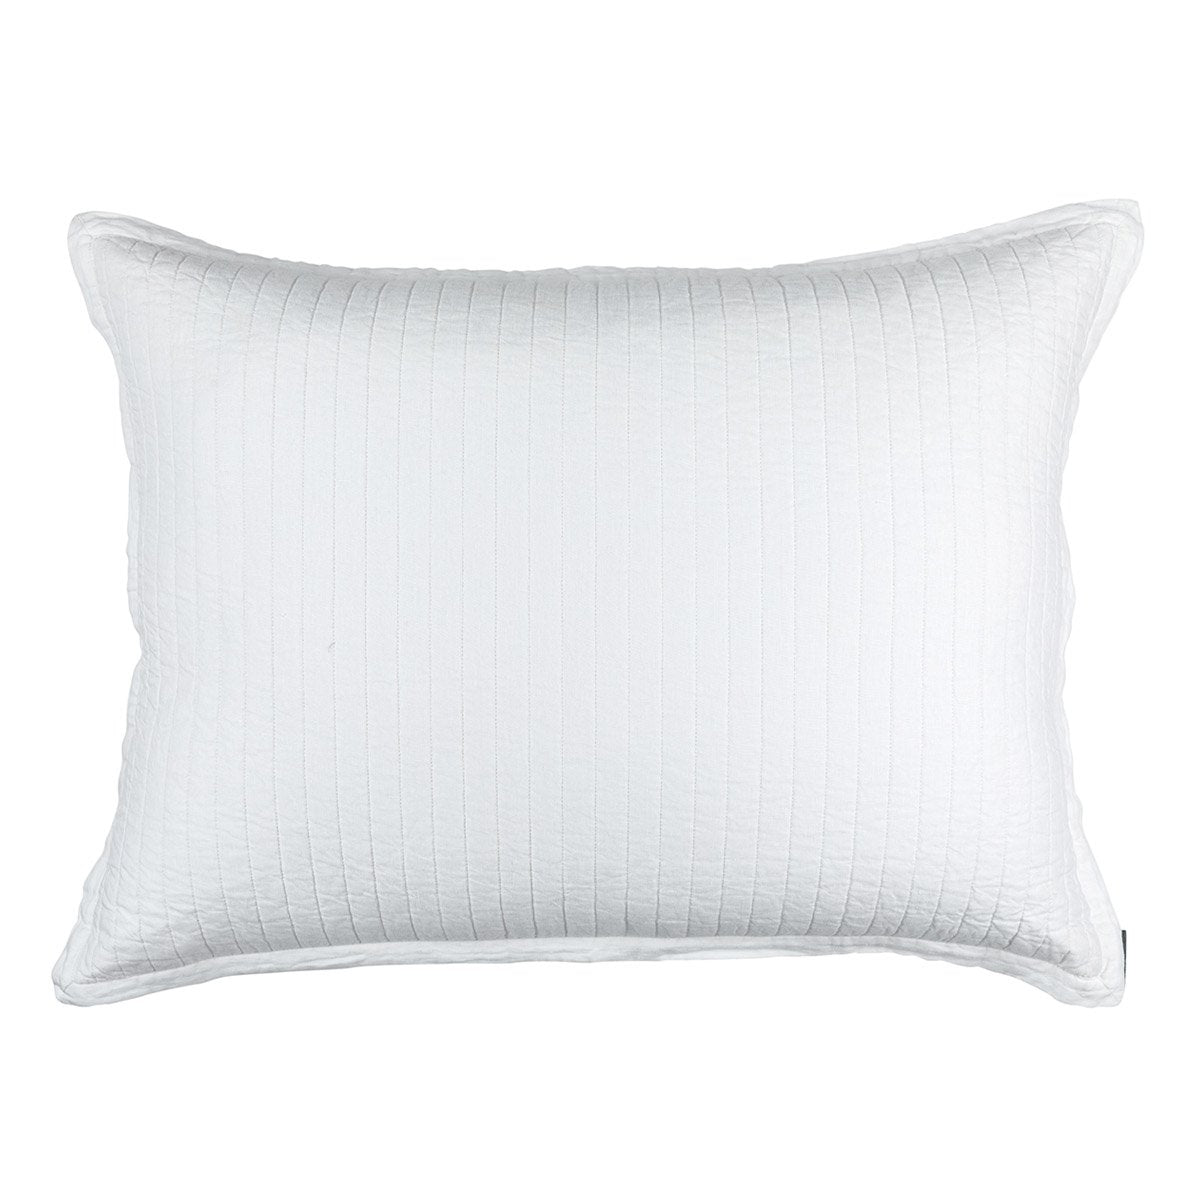 Fig Linens - Lili Alessandra Bedding - Tessa White Quilted Luxe Euro Pillow